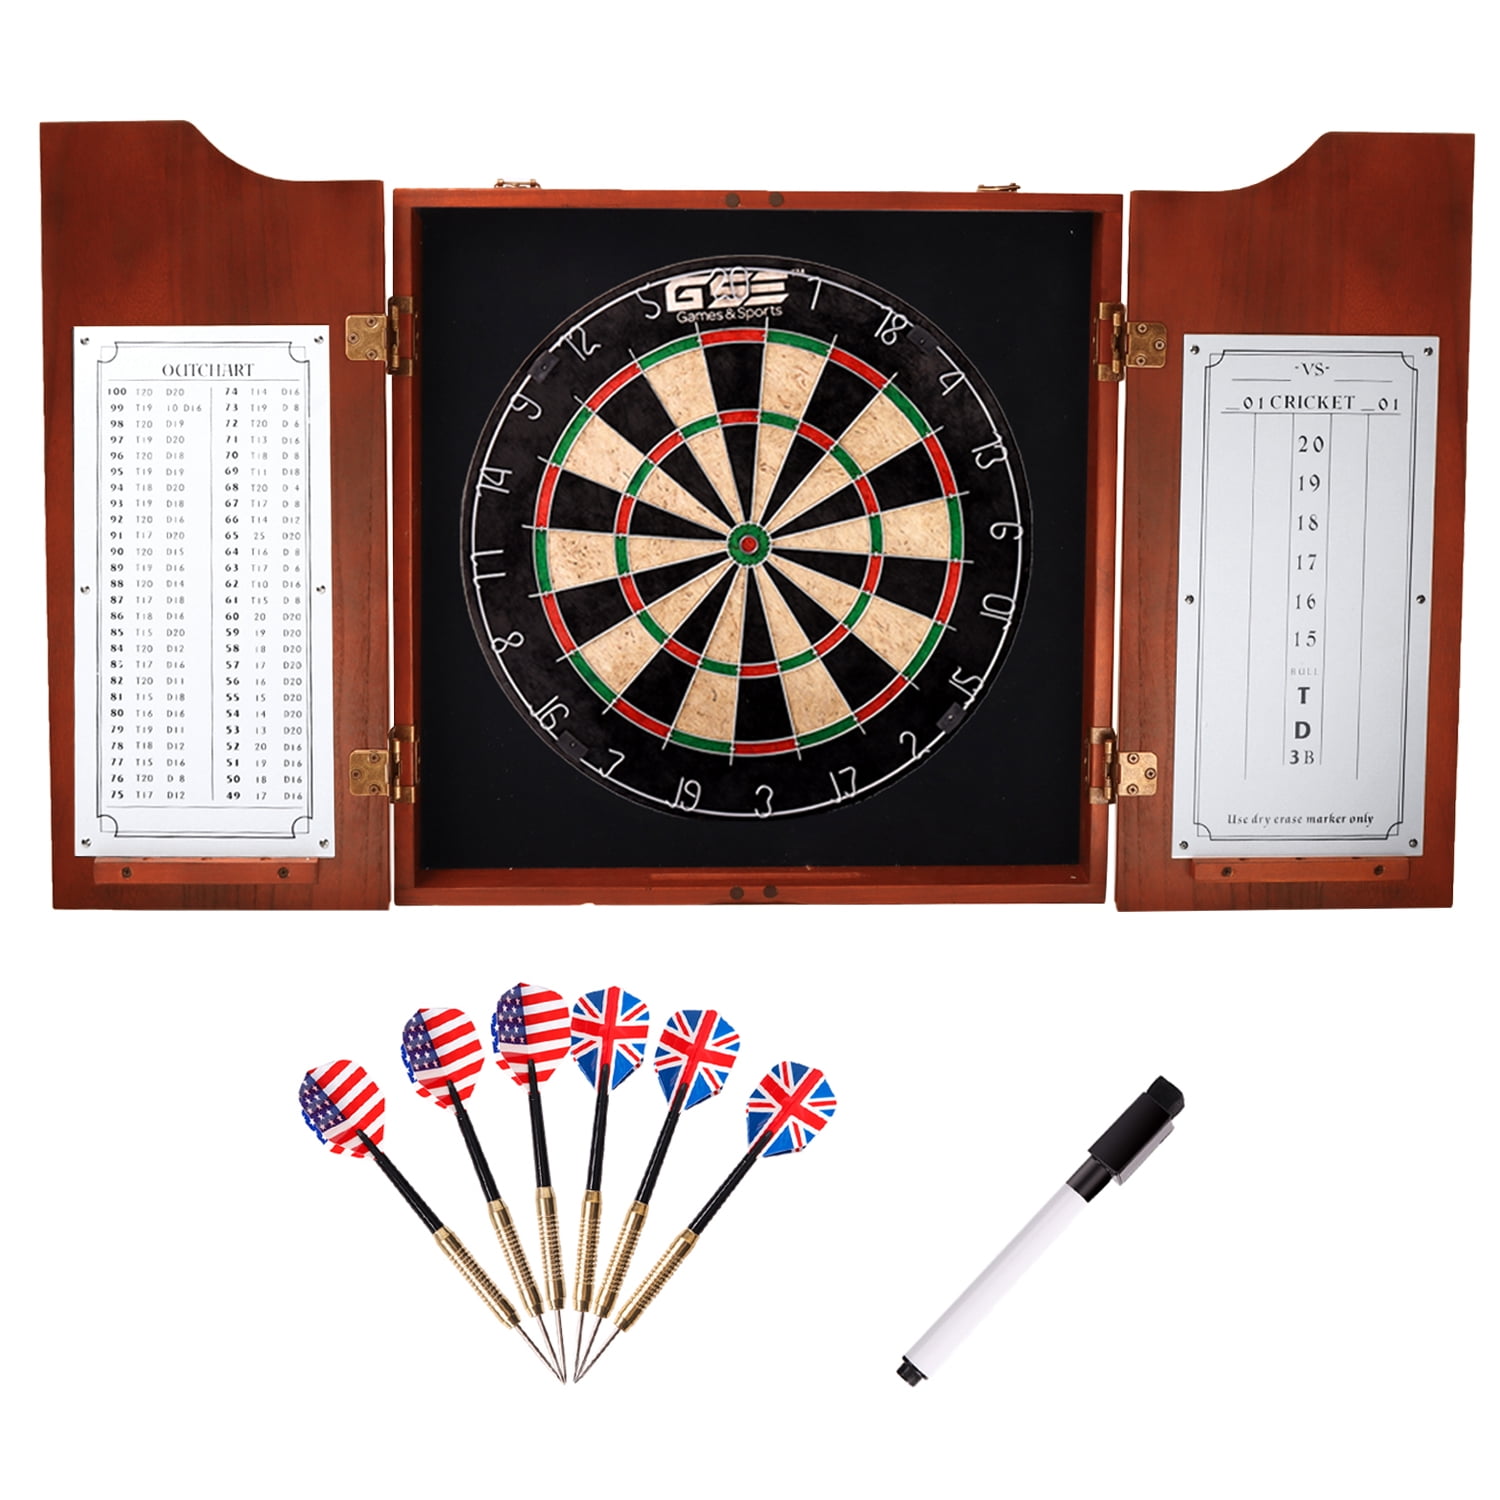 GSE Games & Sports Expert 2-in-1 Shuffleboard and Curling Tabletop Game Set